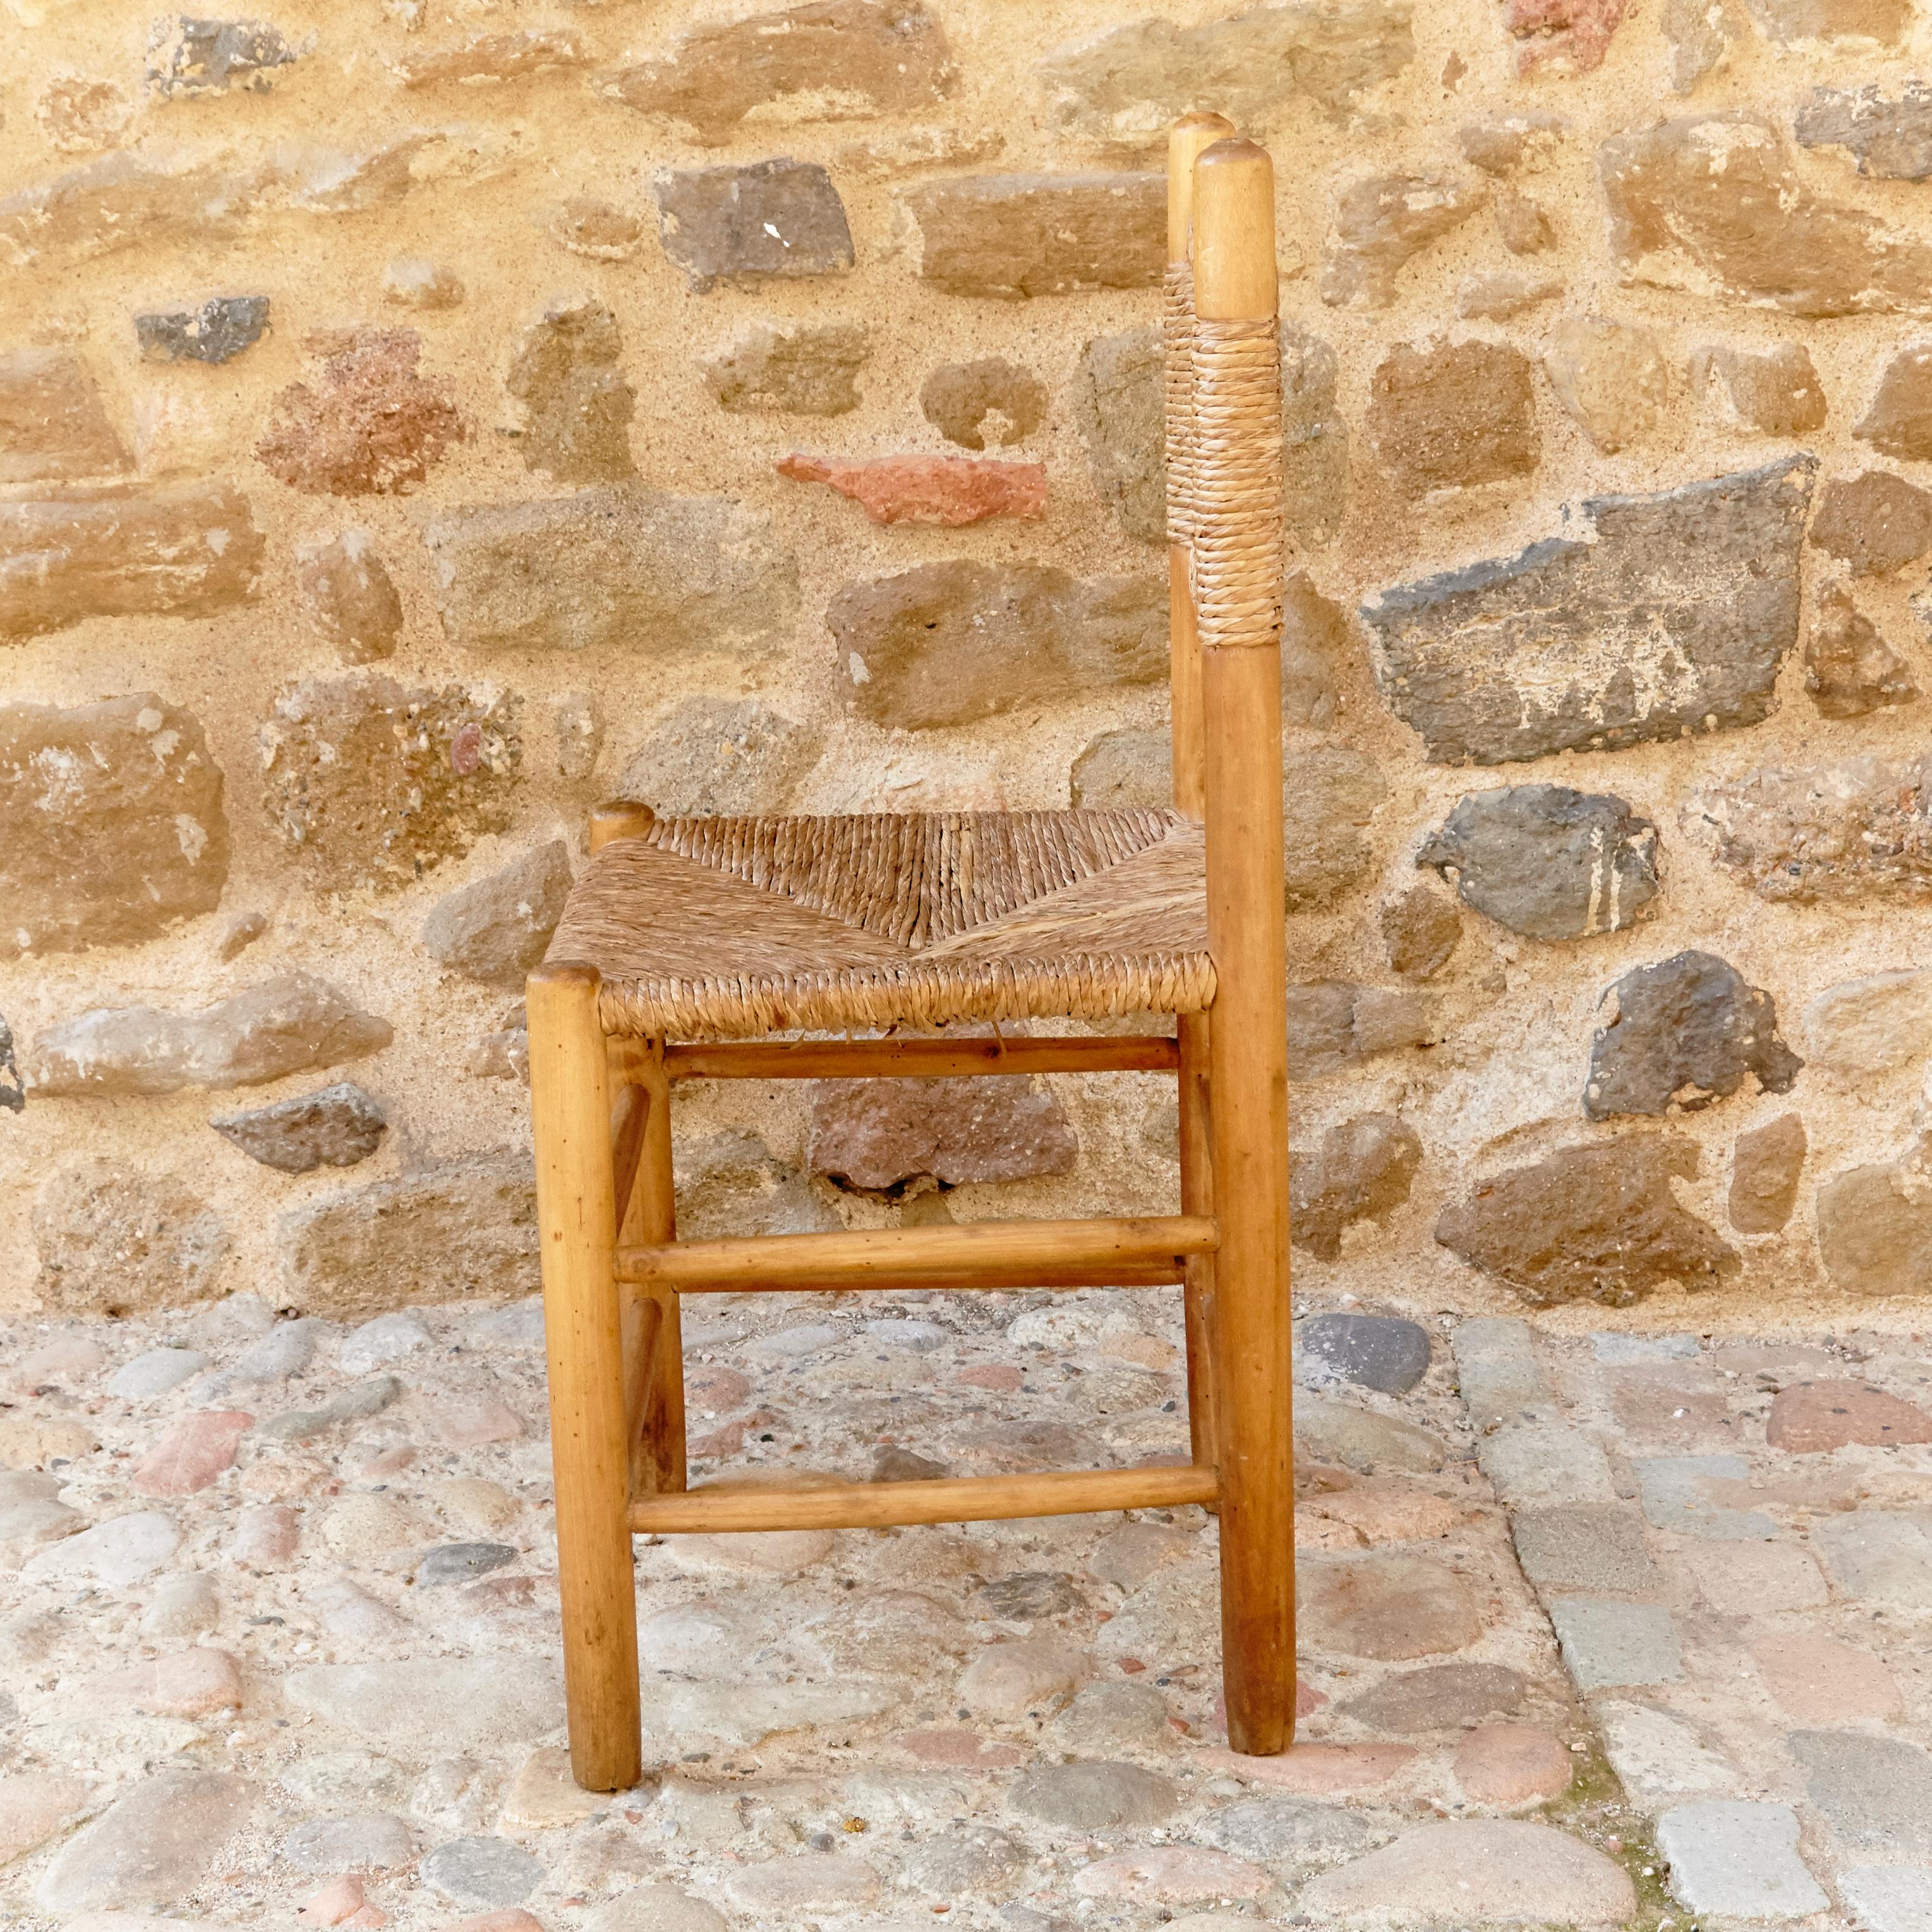 Chair designed in the style of Charlotte Perriand, made by unknown manufacturer.

Wood and rattan.

In good original condition, with minor wear consistent with age and use, preserving a beautiful patina.